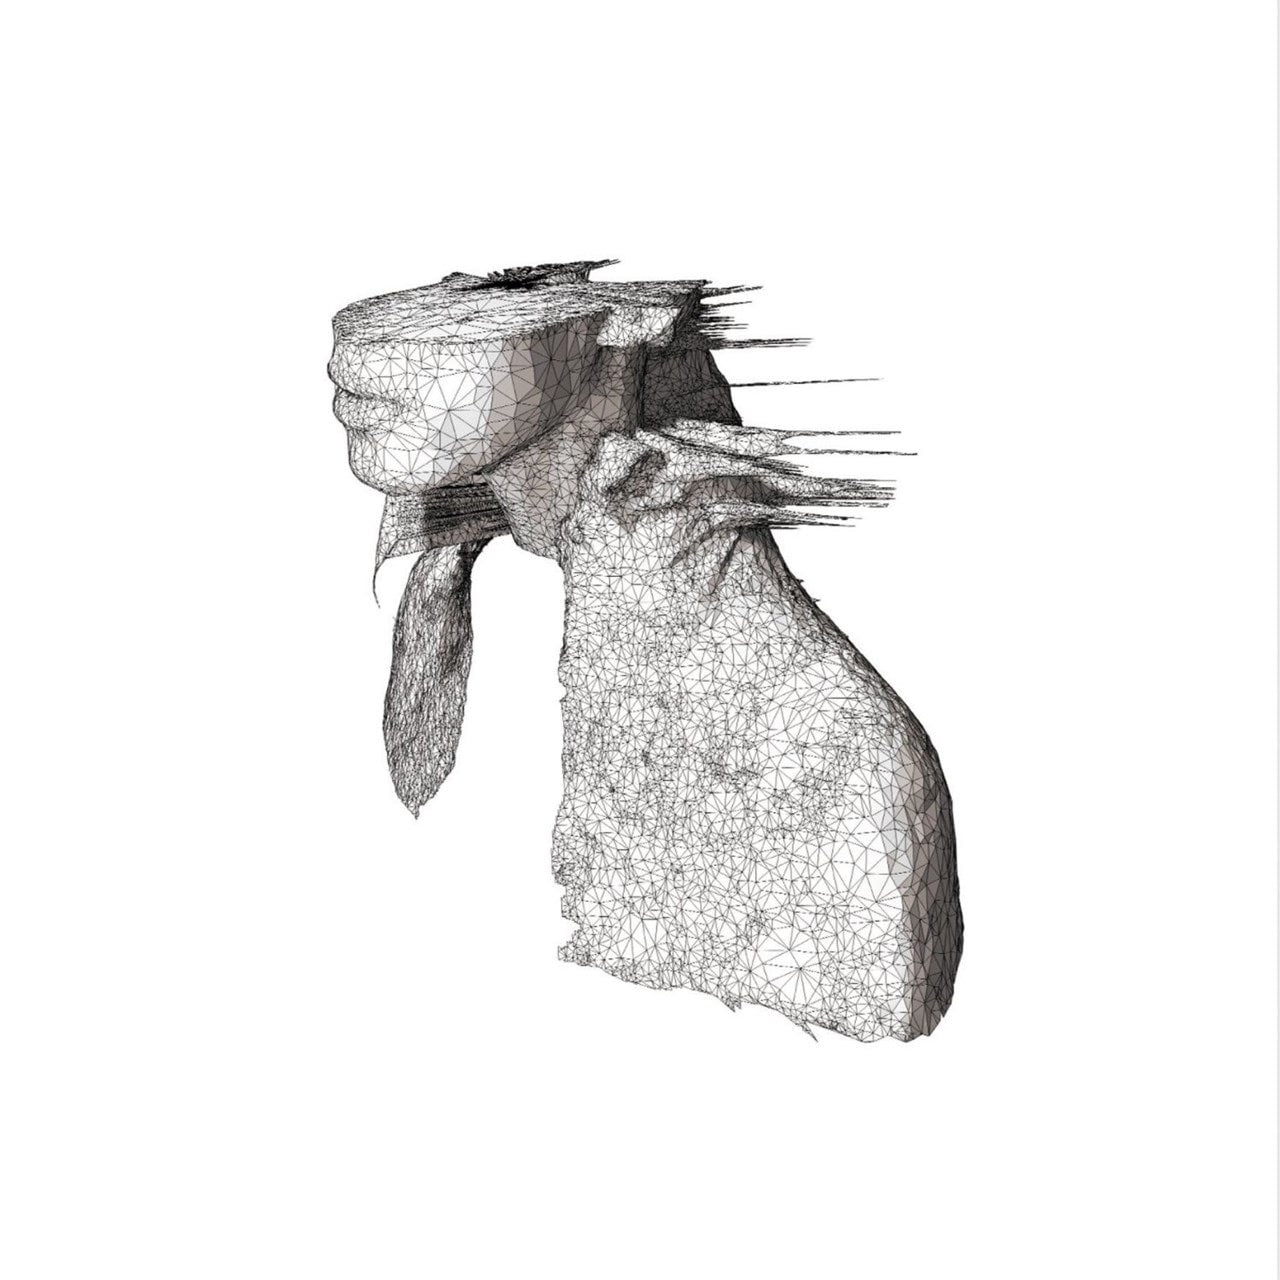 Coldplay - A Rush Of Blood To The Head (Gatefold Sleeve)